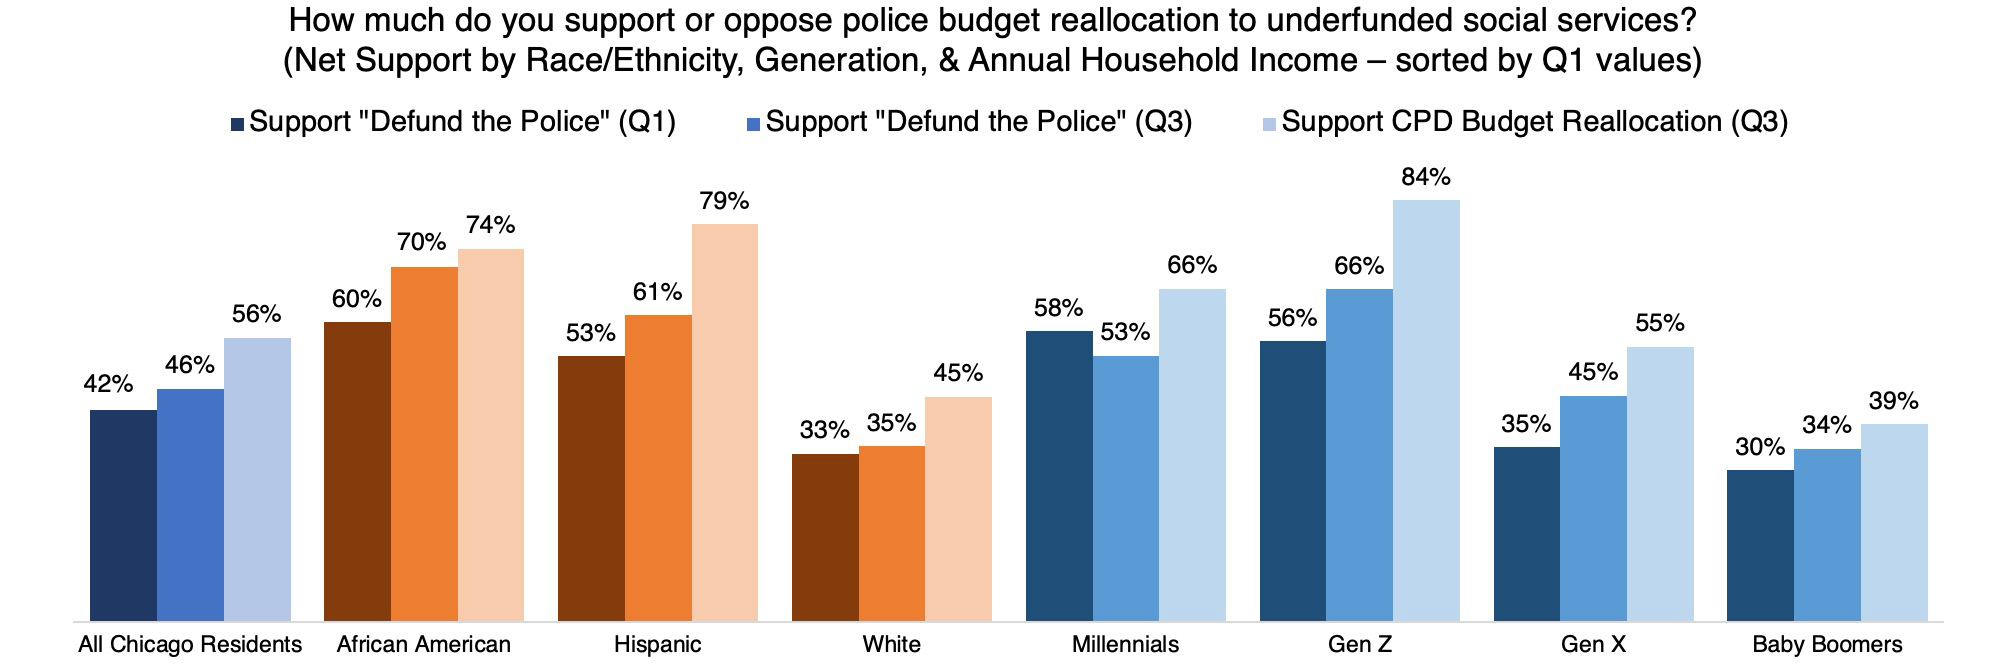 graph of support for and opposing police budge reallocation to underfunded social services